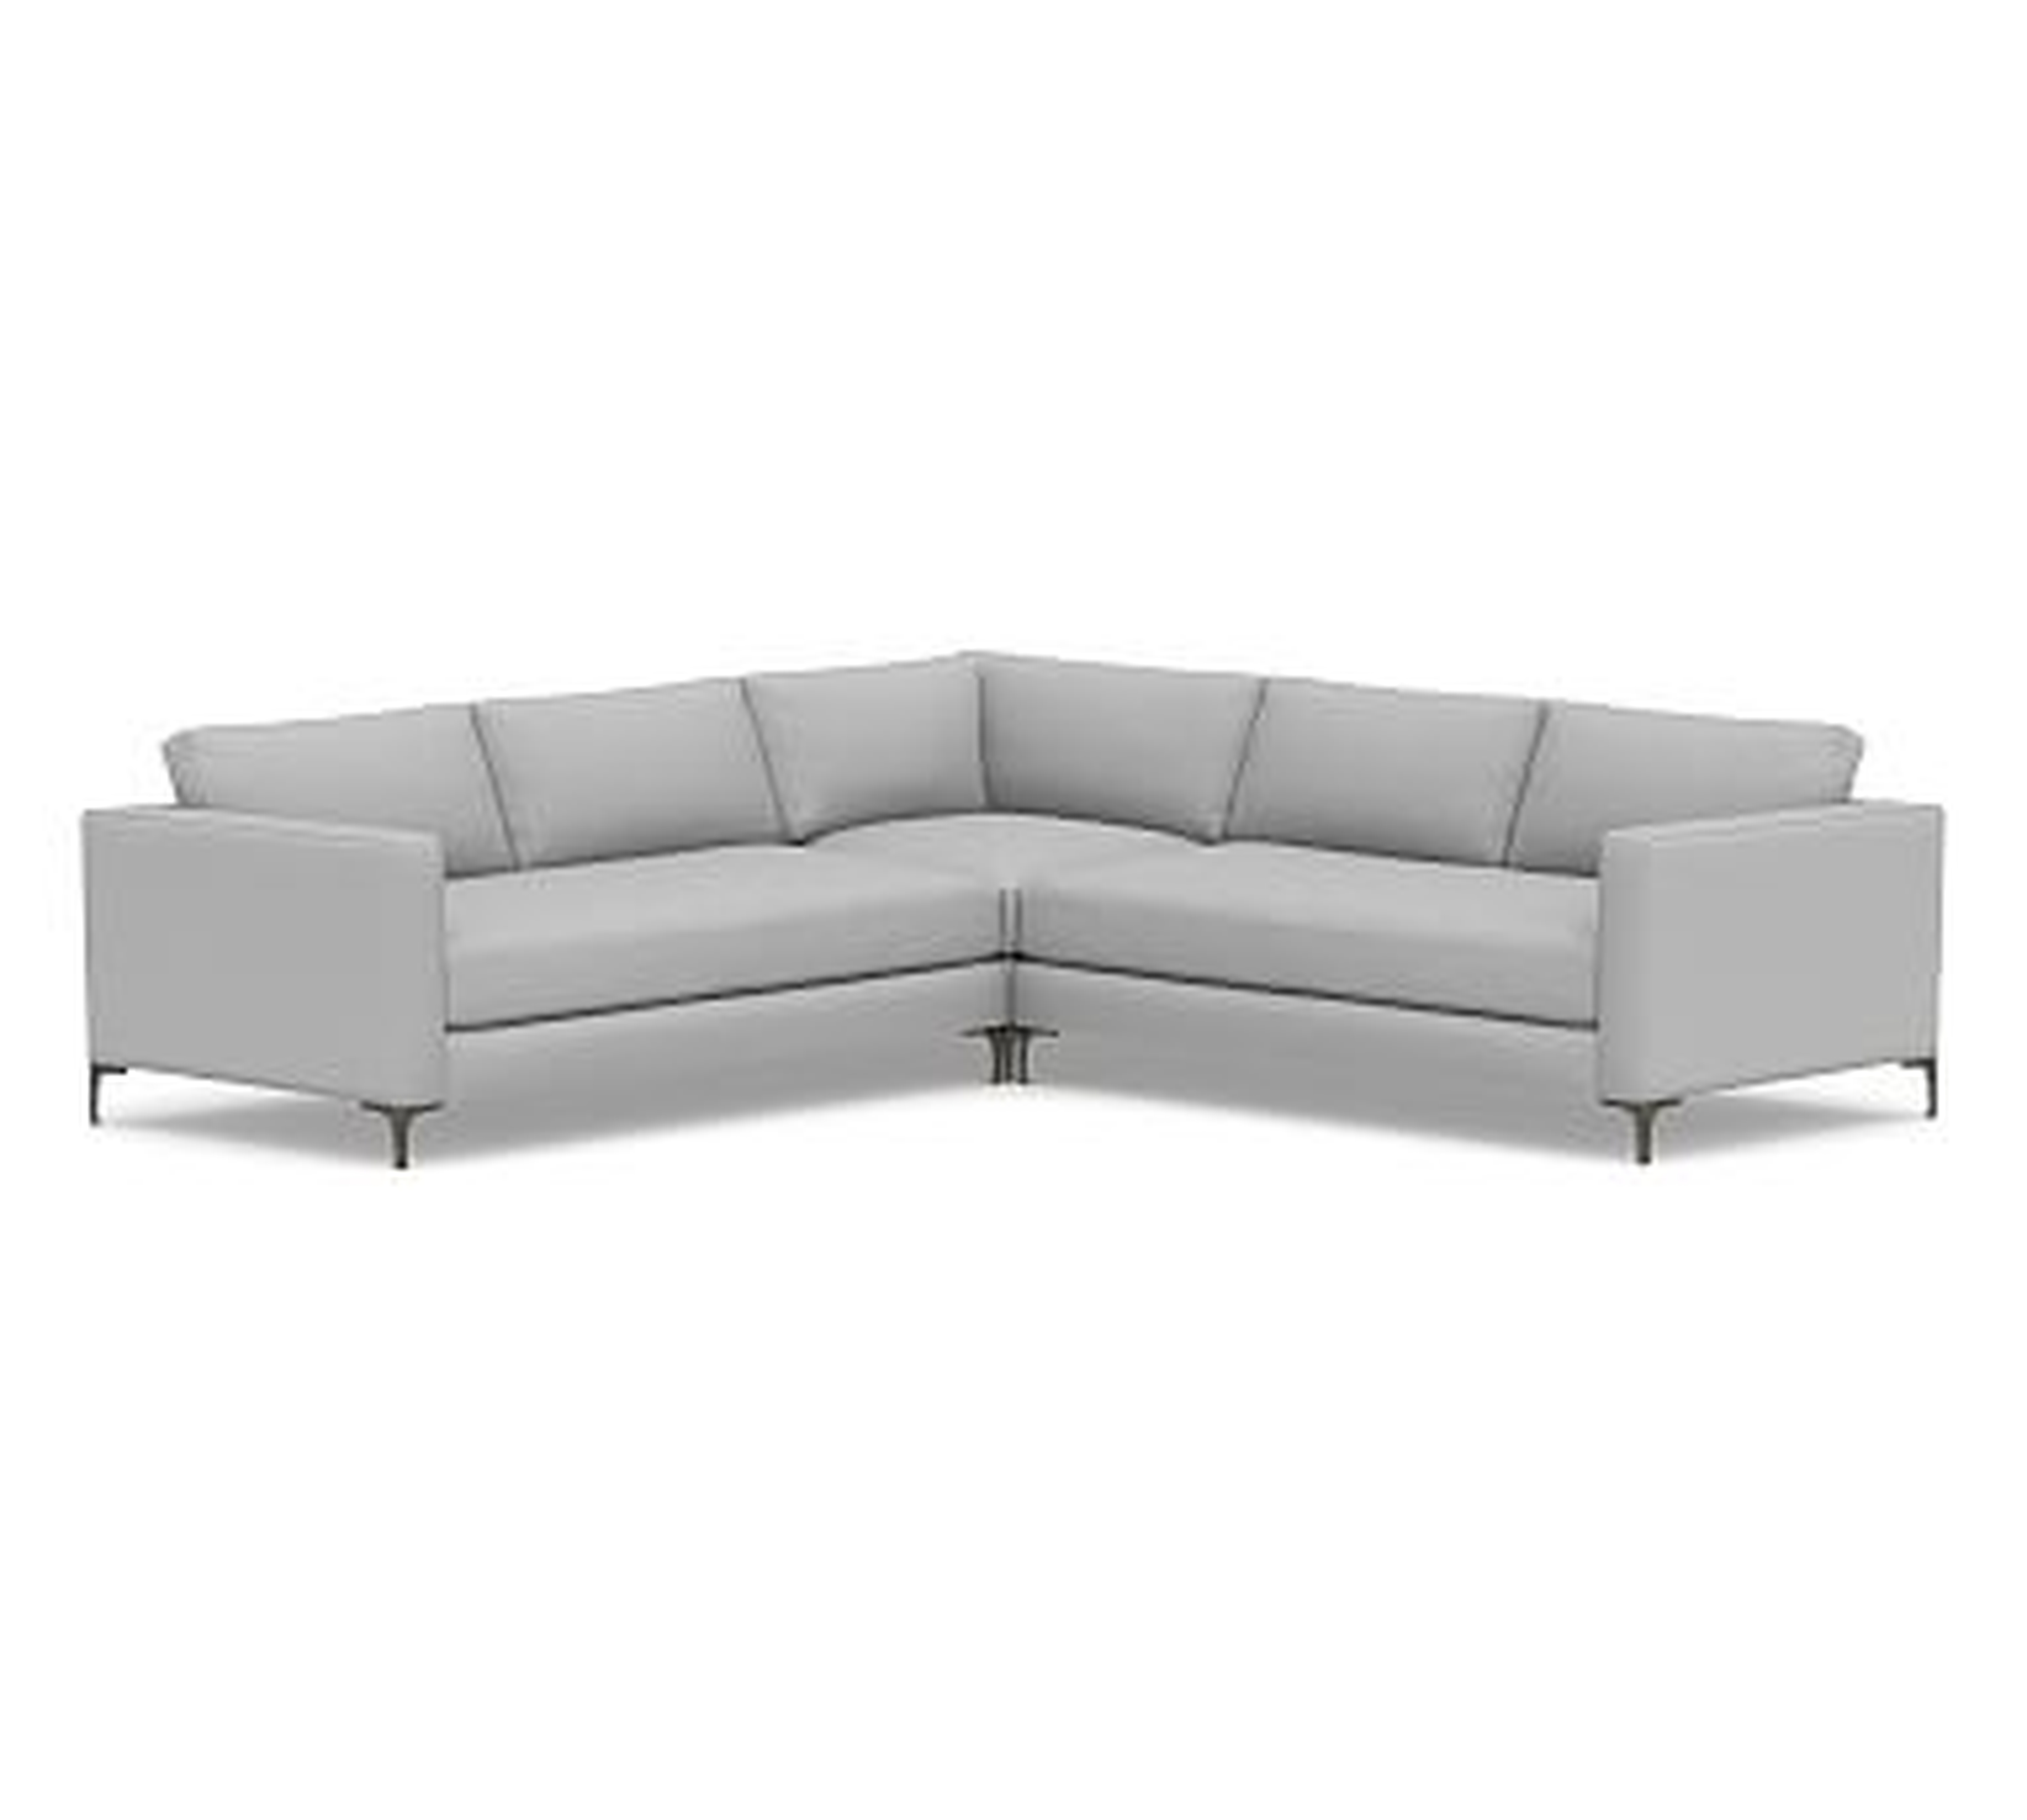 Jake Upholstered 3-Piece L-Shaped Corner Sectional, Bench Cushion, Bronze Legs, Polyester Wrapped Cushions, Brushed Crossweave Light Gray - Pottery Barn